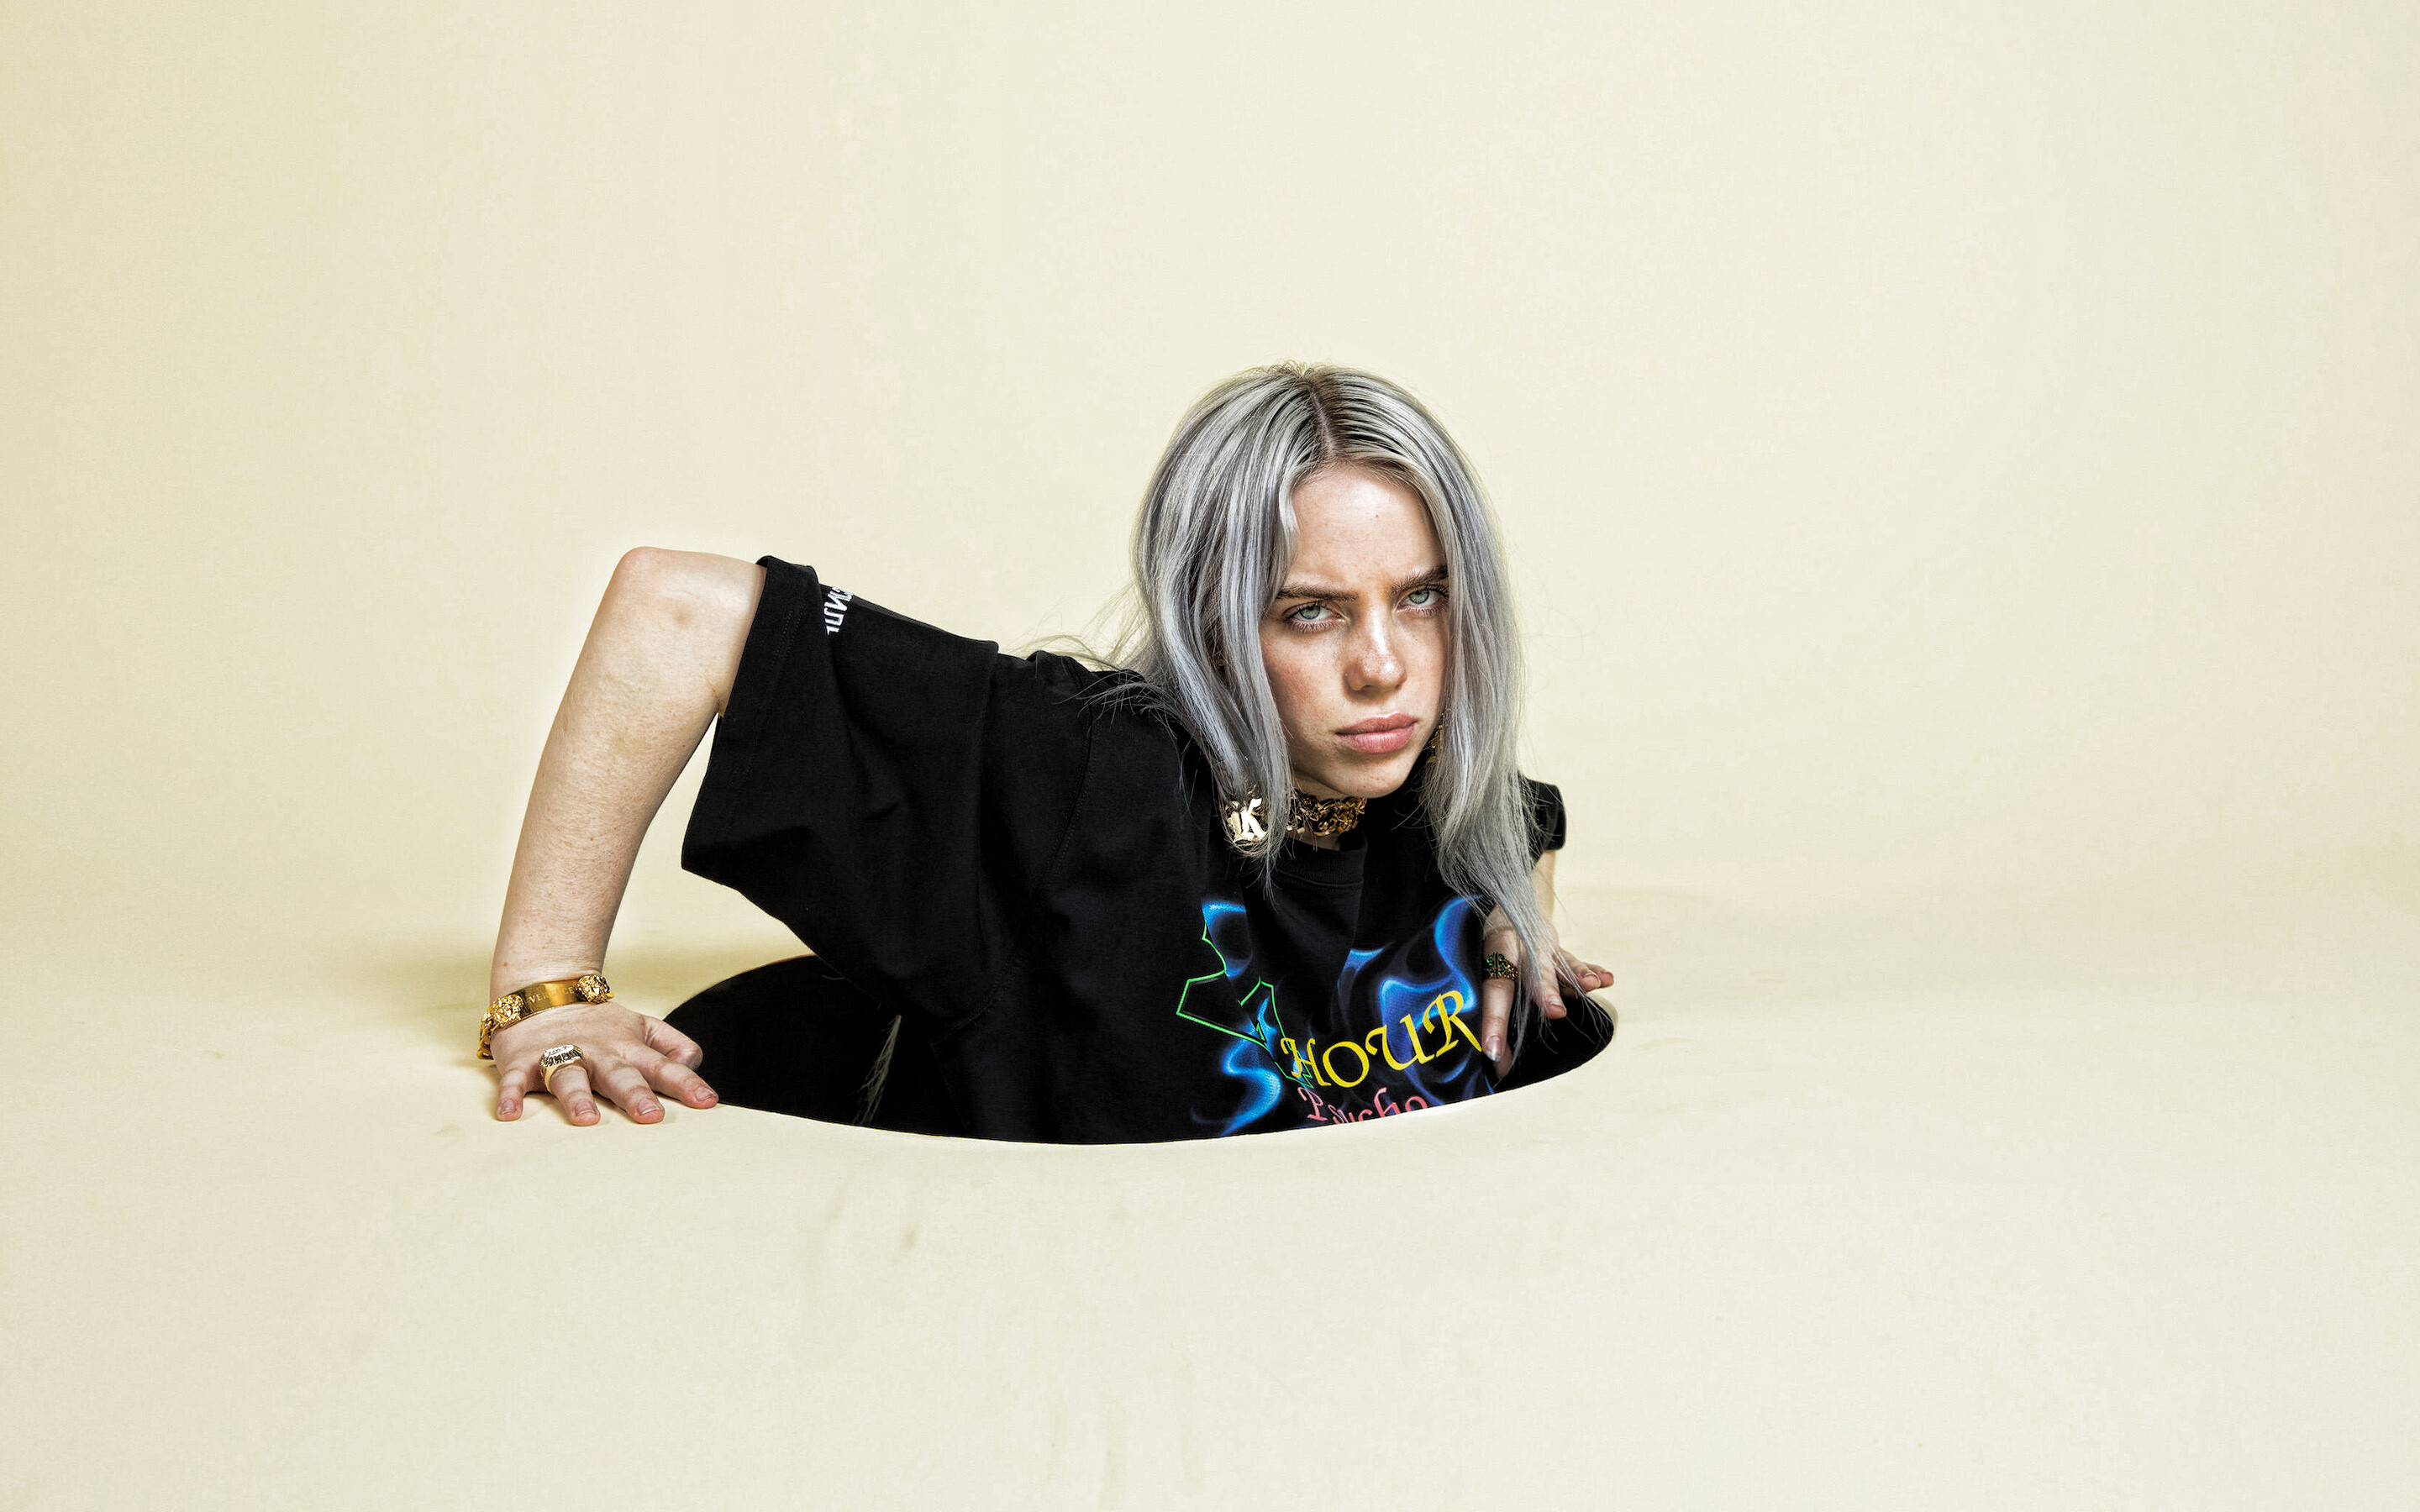 Billie Eilish: The performer of the theme song “No Time to Die” for the James Bond film. 2880x1800 HD Background.